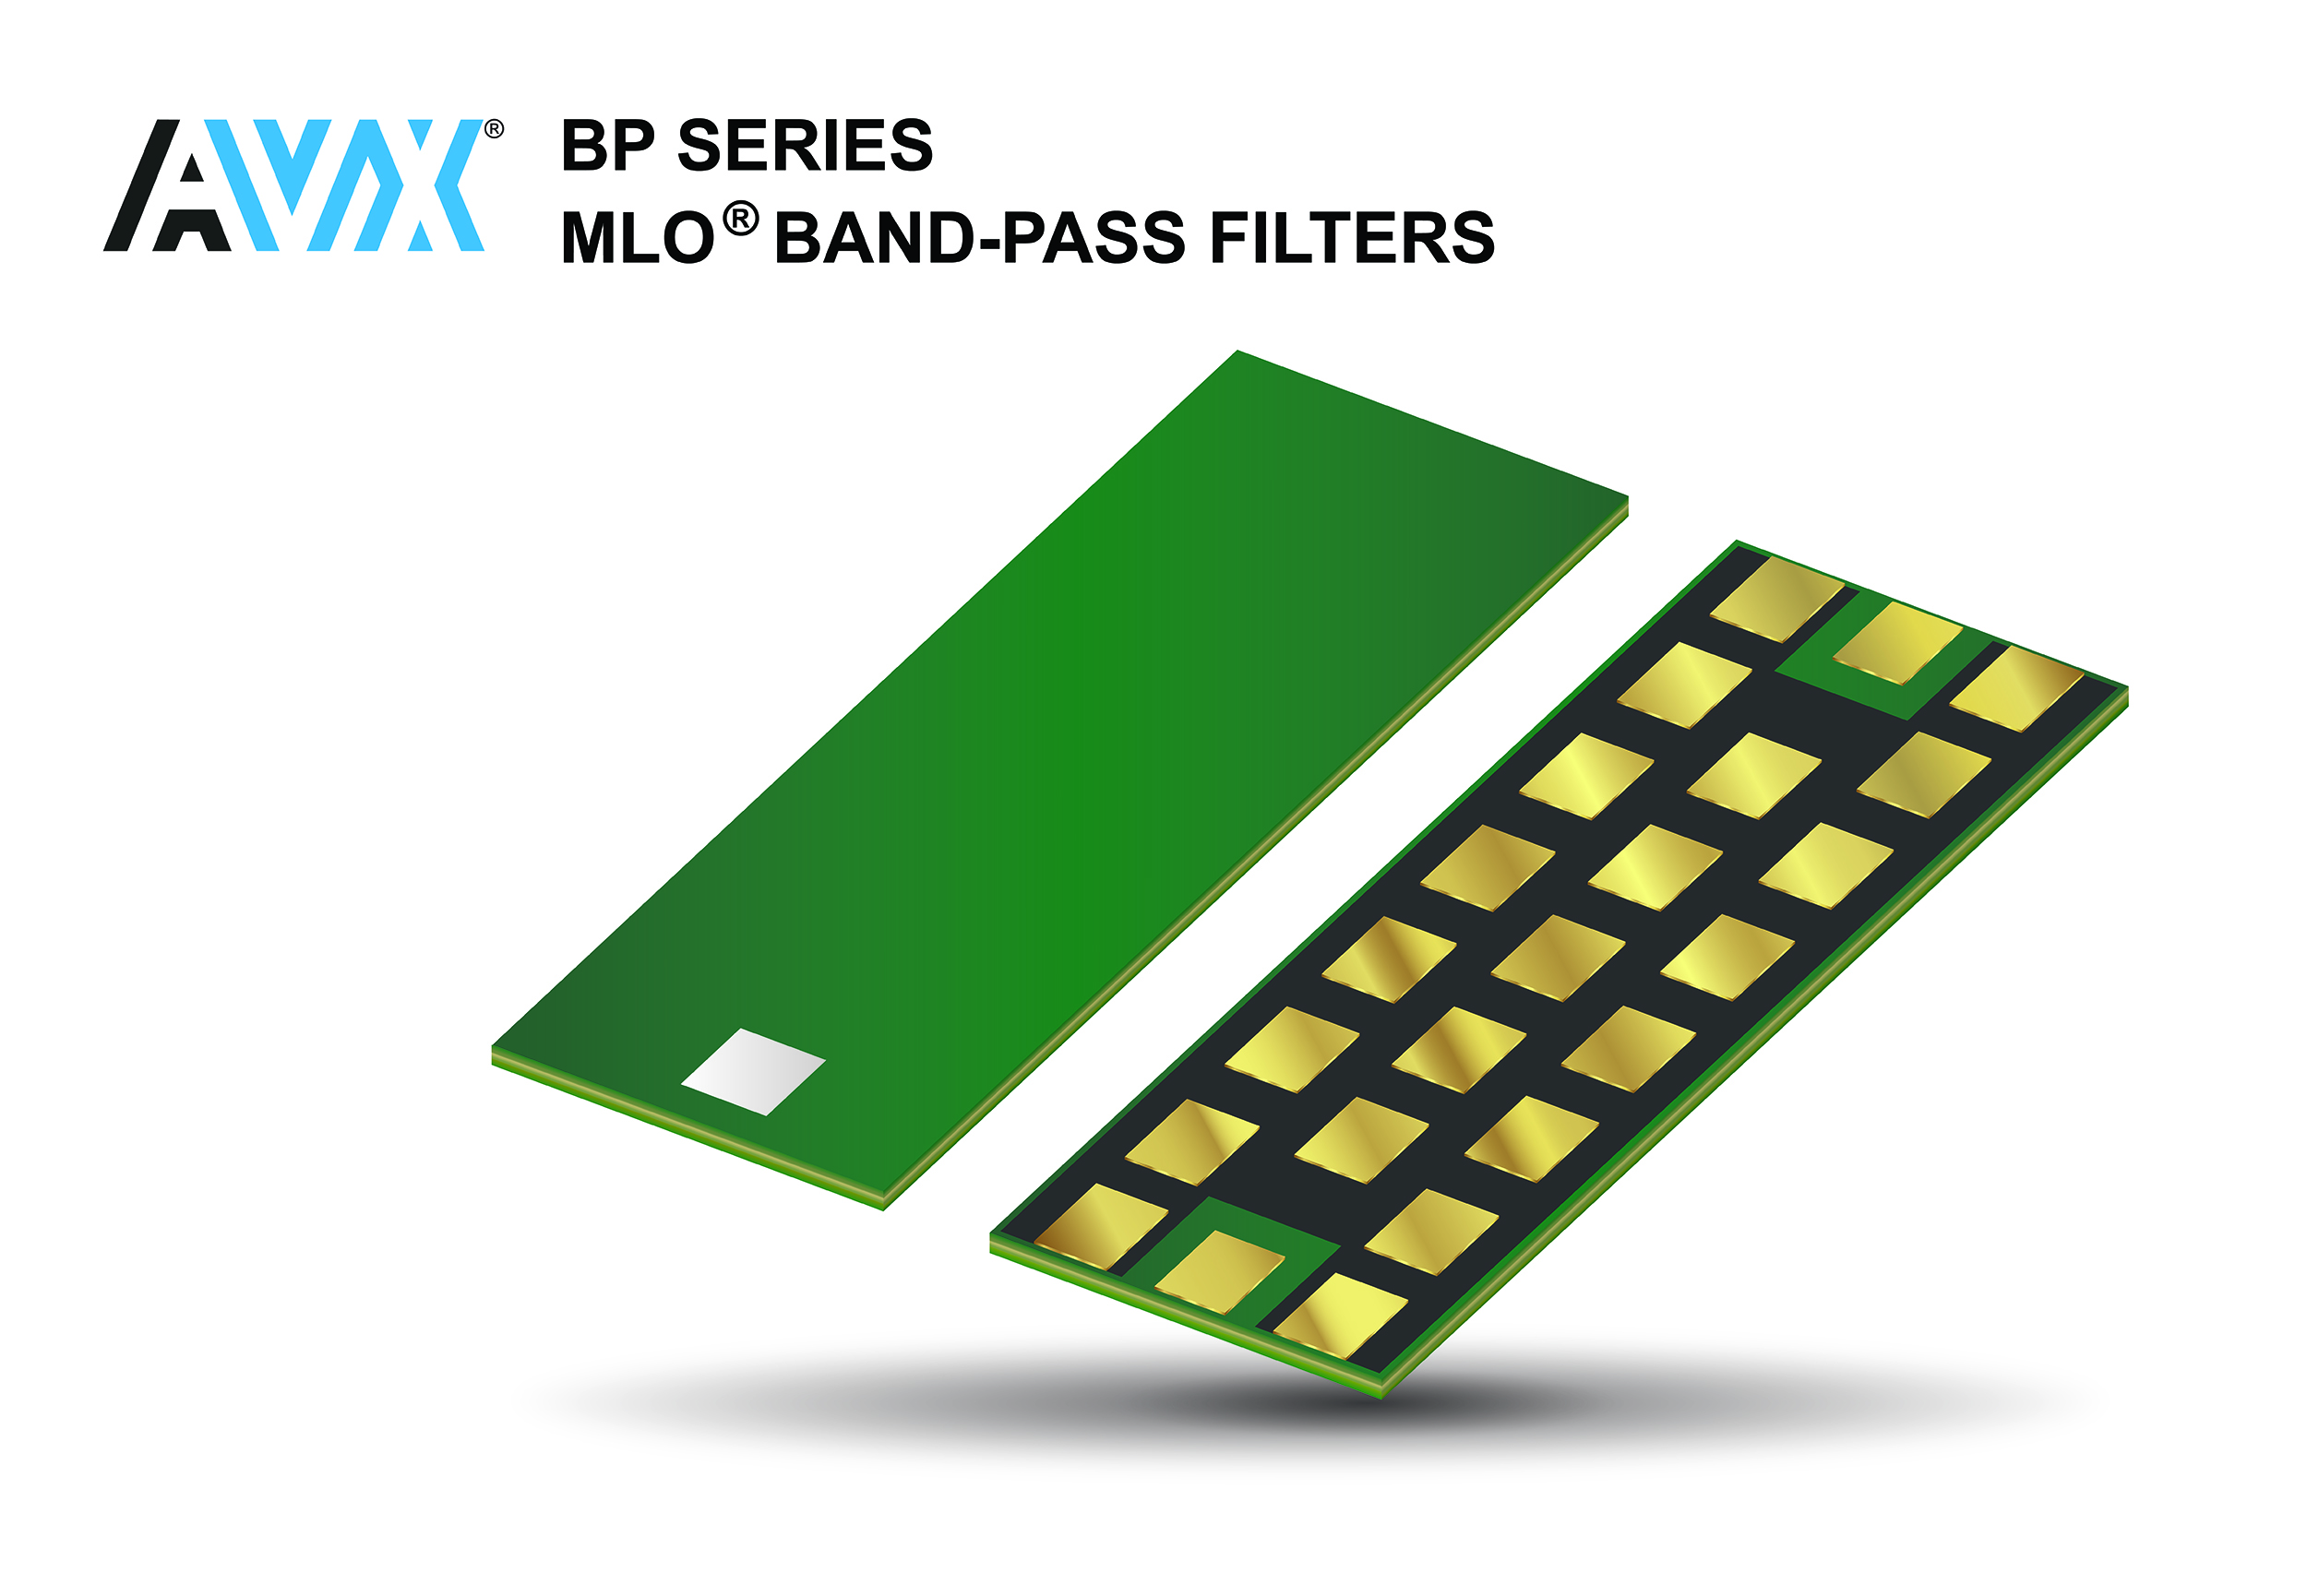 High-Performance MLO Band-Pass Filters Designed for RF/Microwave Applications